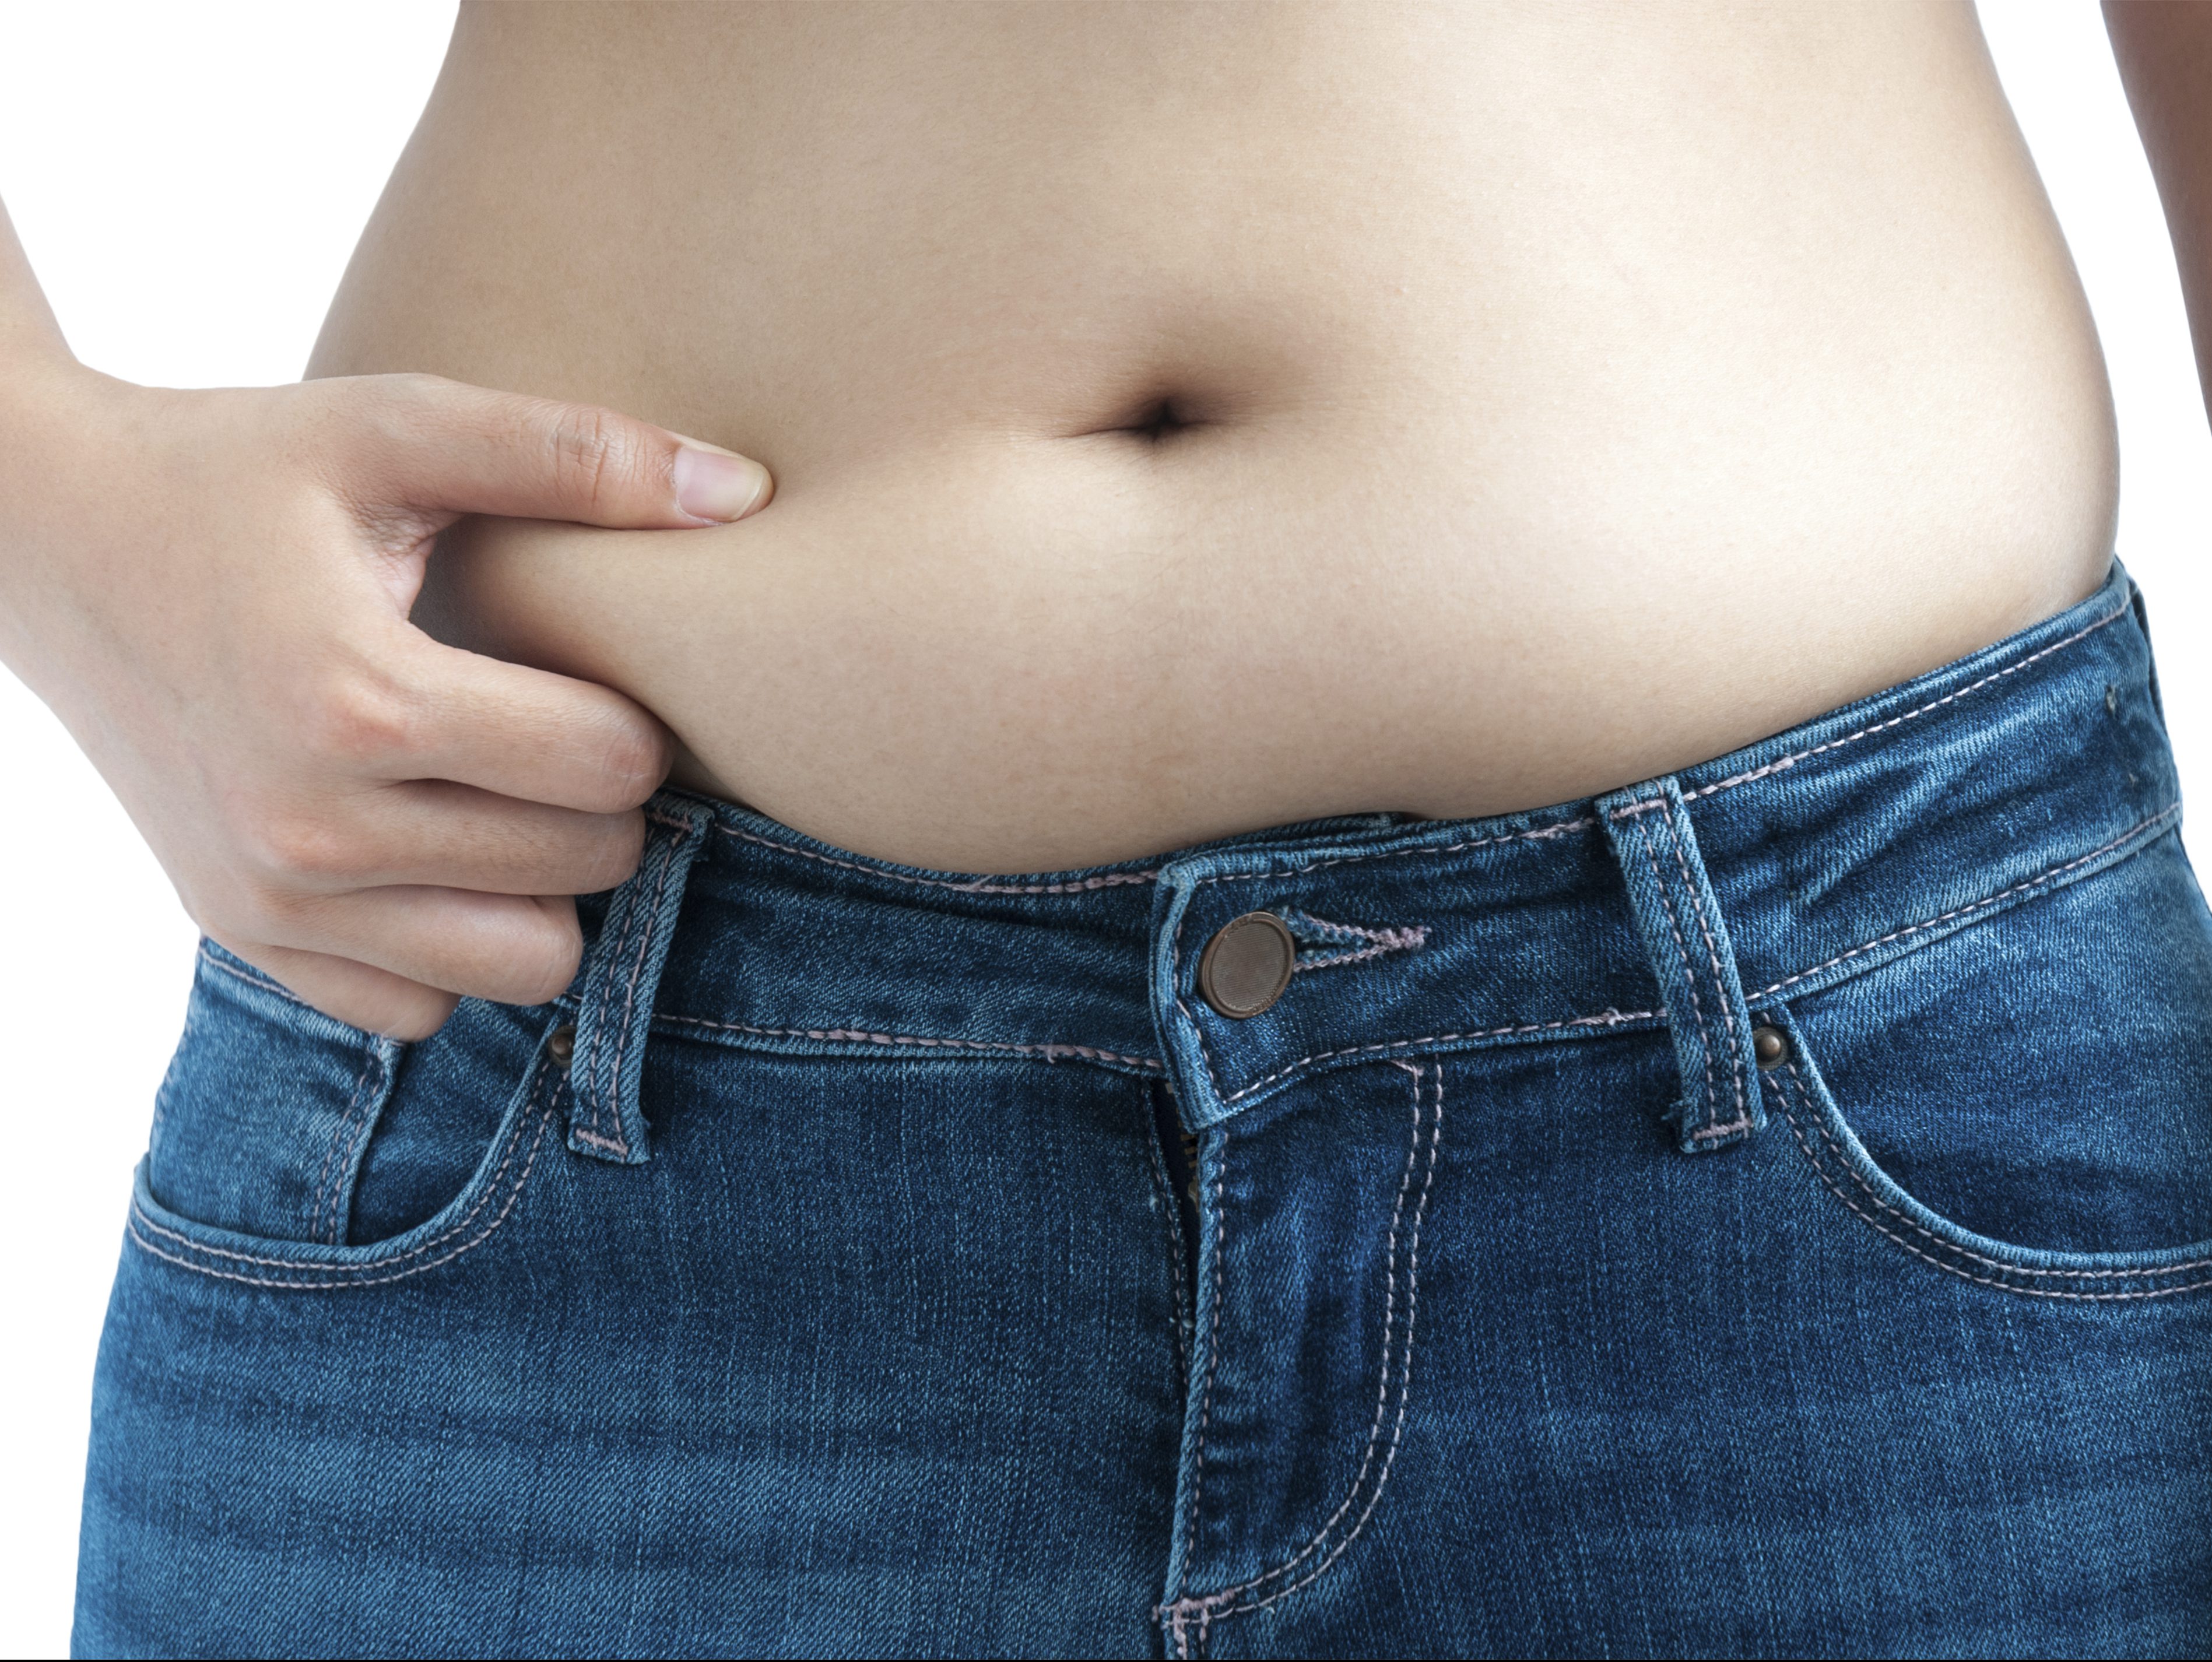 Are you suffering from beauty therapist’s belly fat?